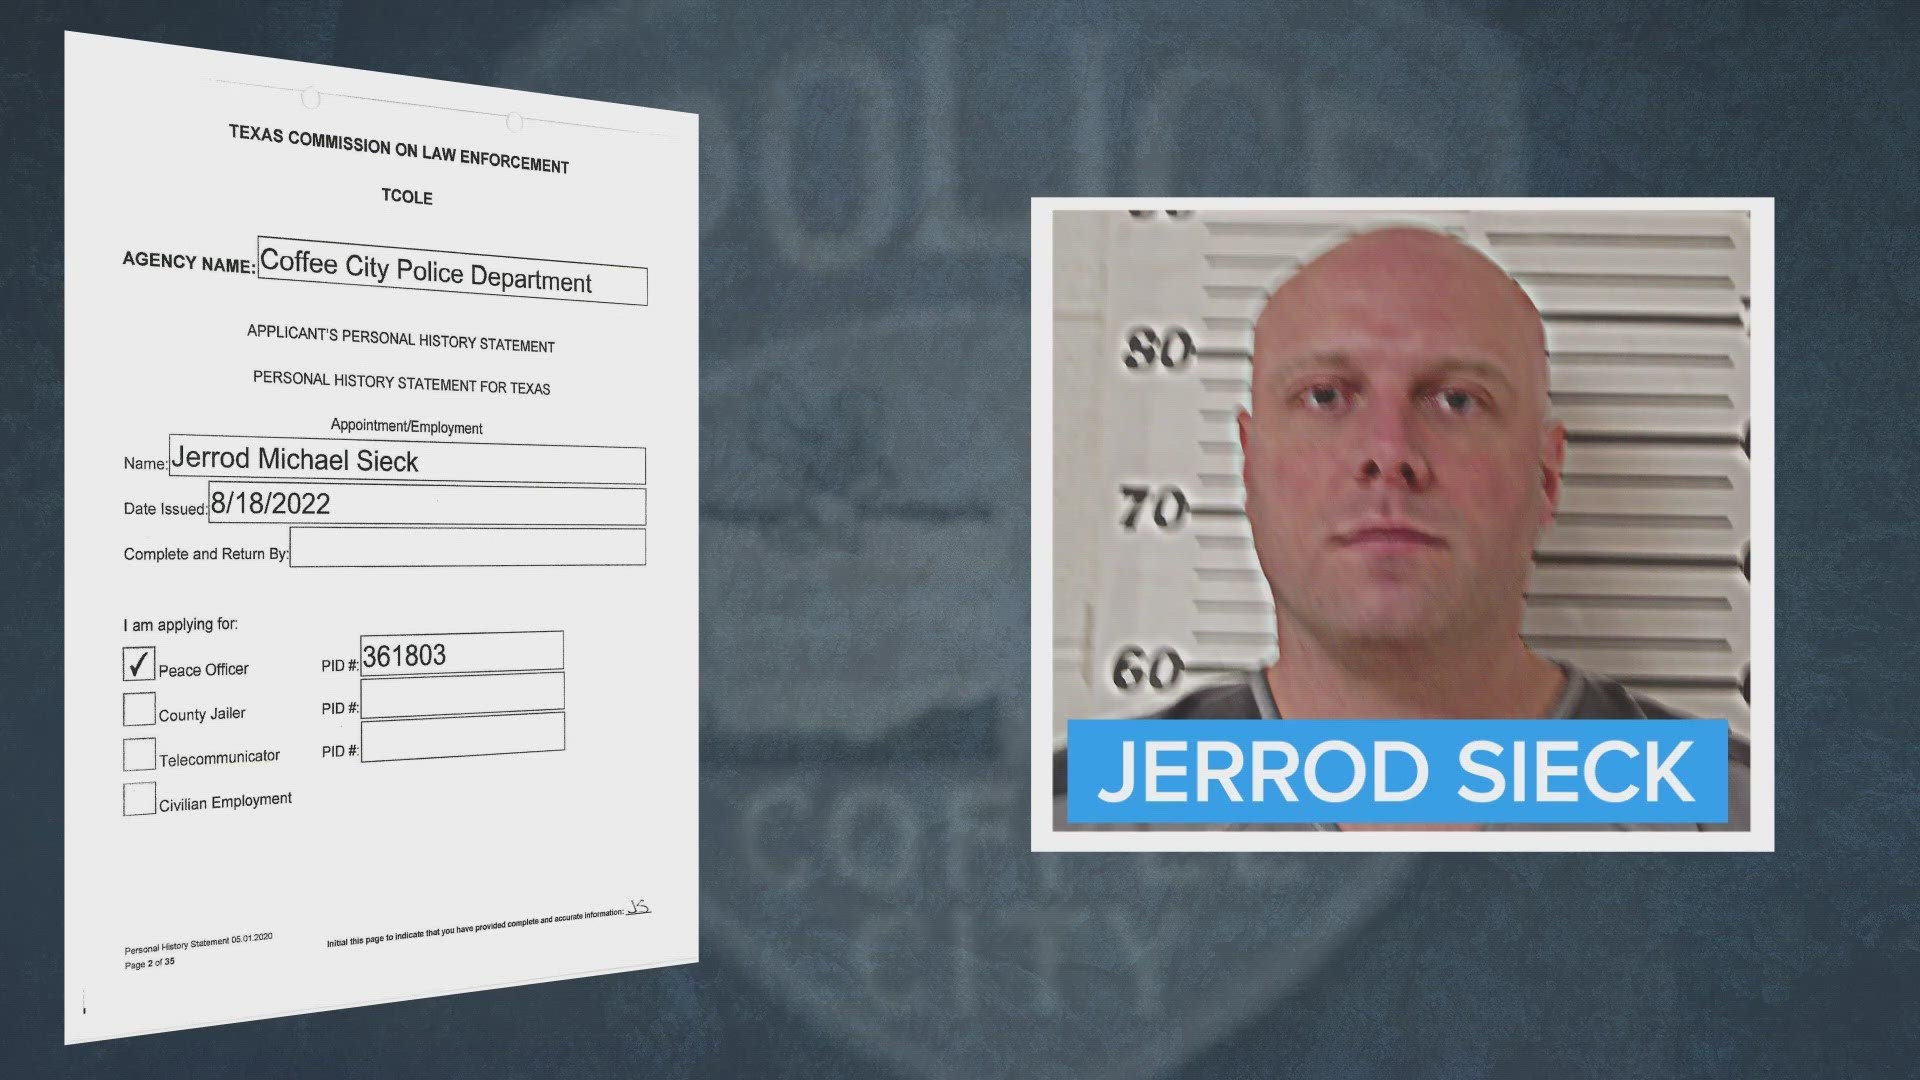 Jerrod Sieck is accused of omitting prior misconduct on his Coffee City job application.